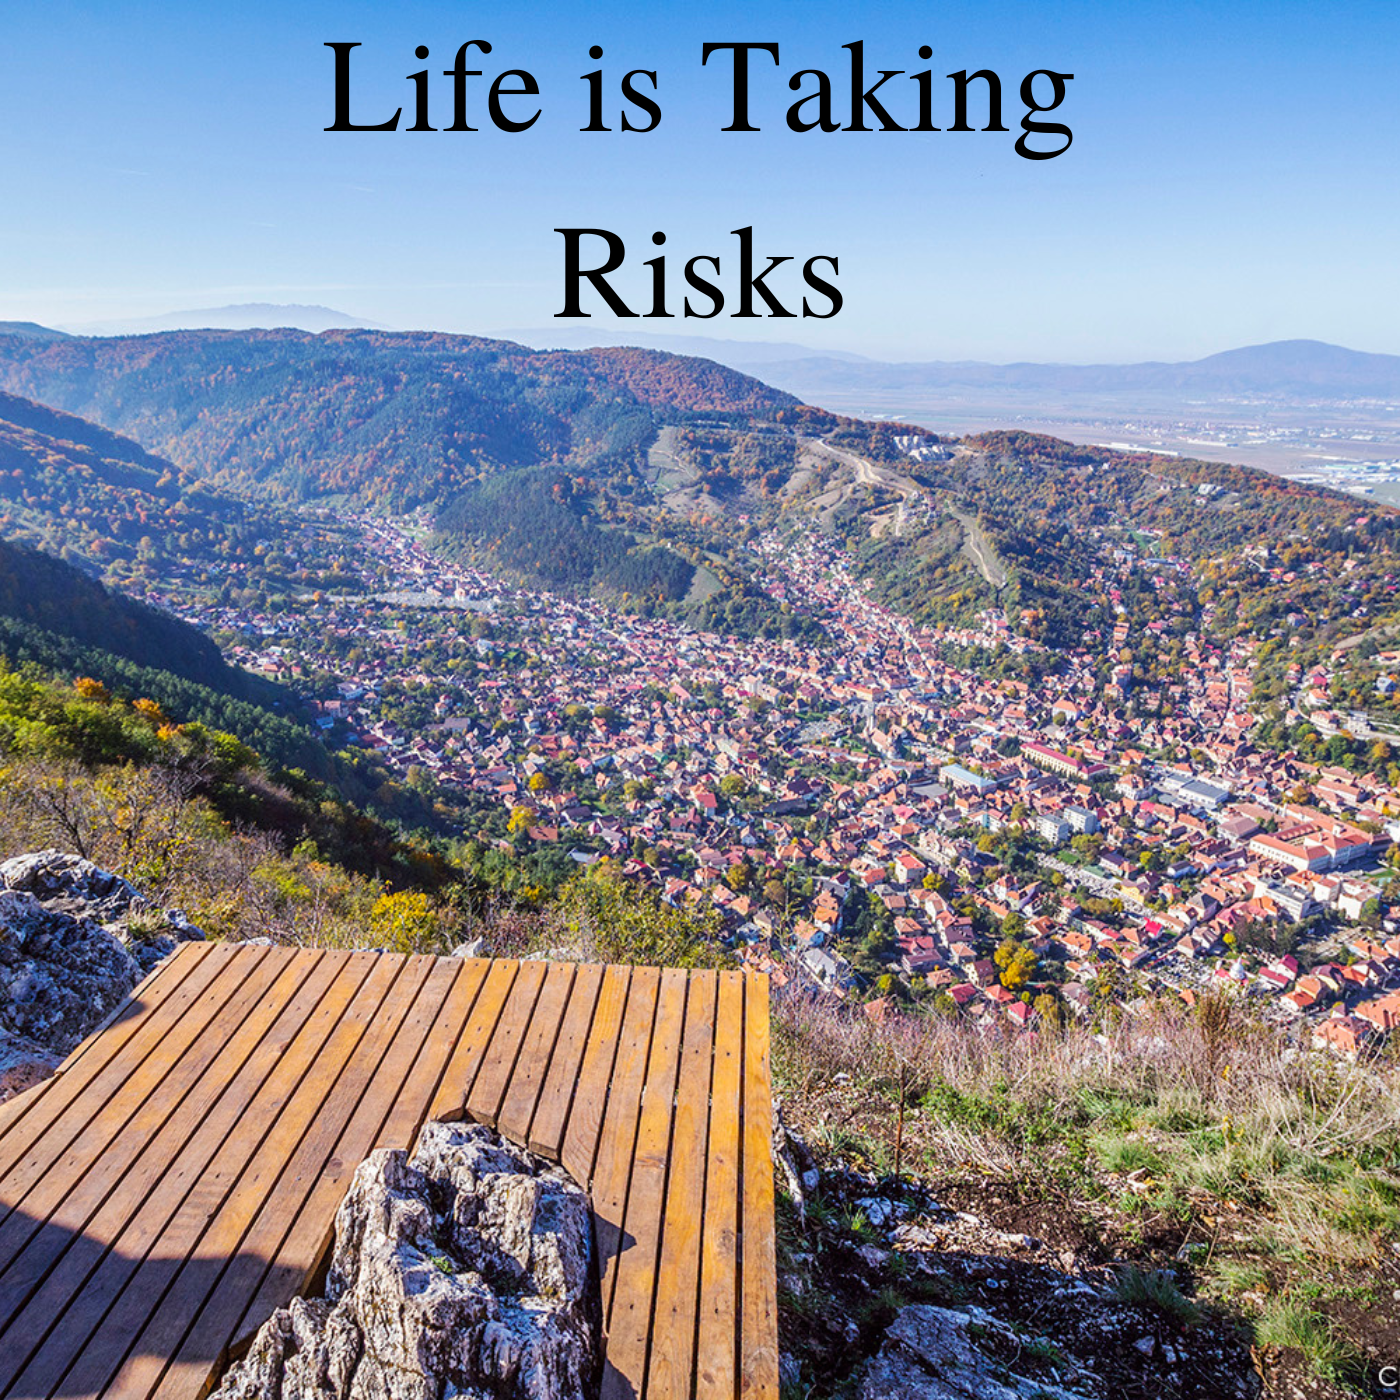 * Life is Taking Risks